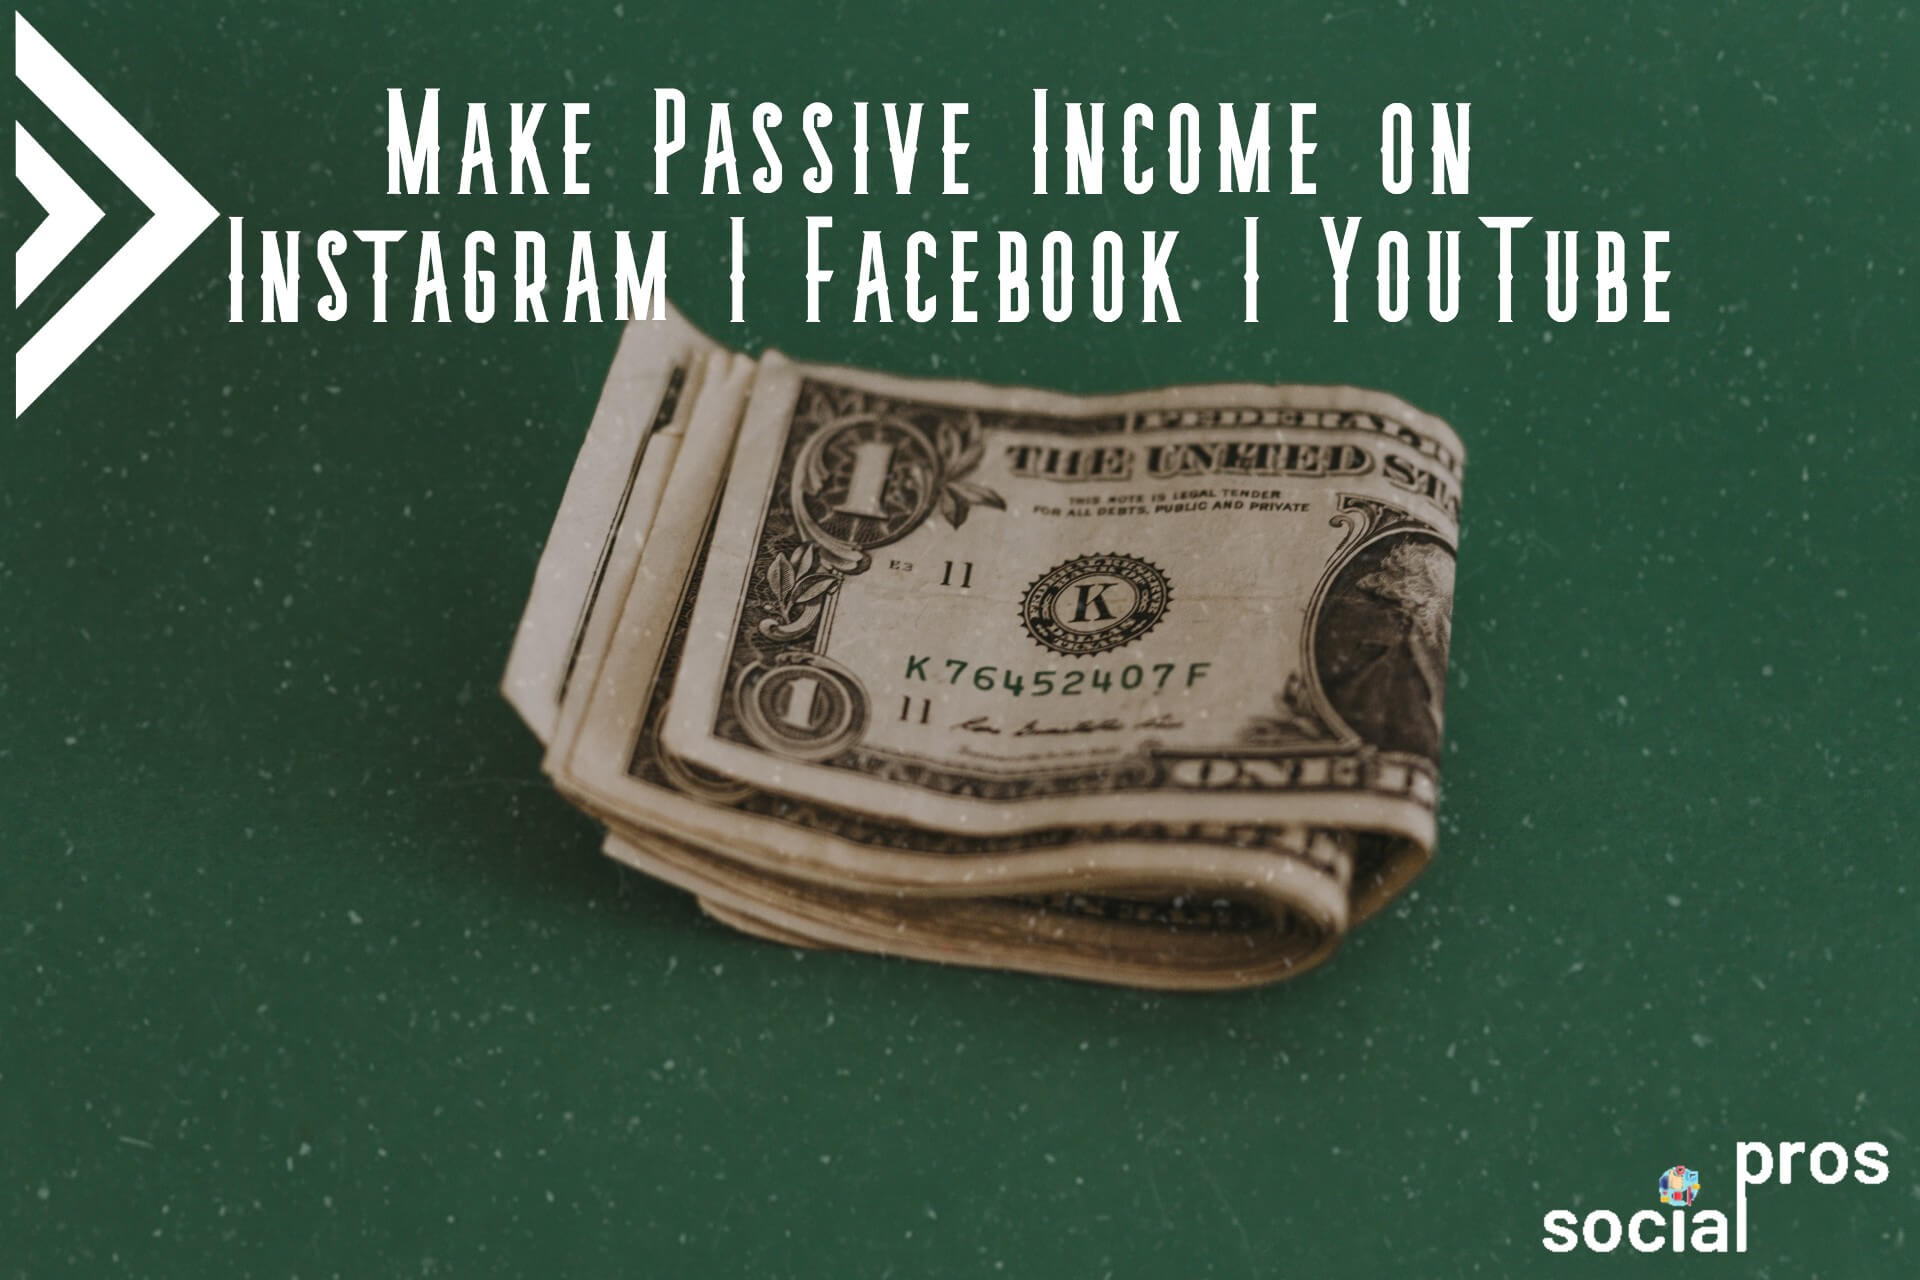 You are currently viewing Make Passive Income on Instagram and Facebook in 2021